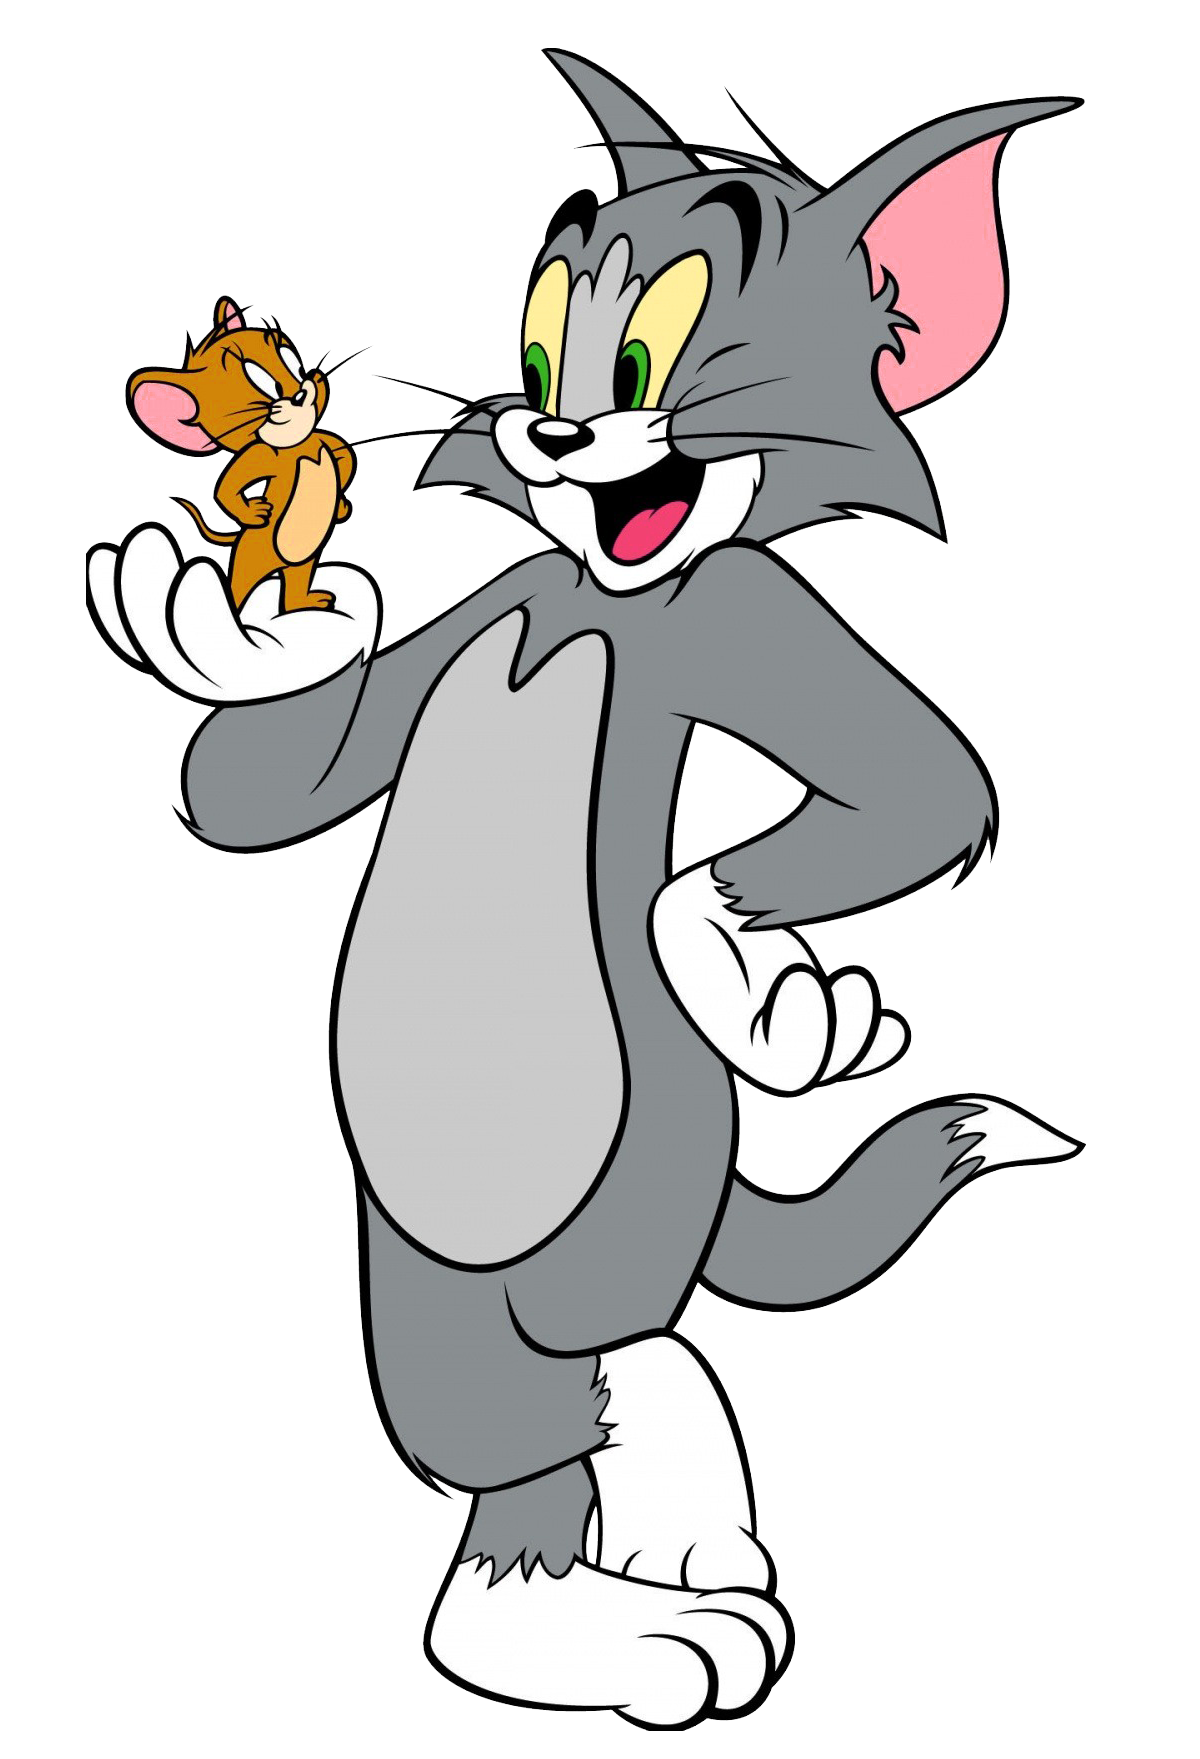 Tom And Jerry PNG Images, Cartoon Characters Free Download - Free  Transparent PNG Logos